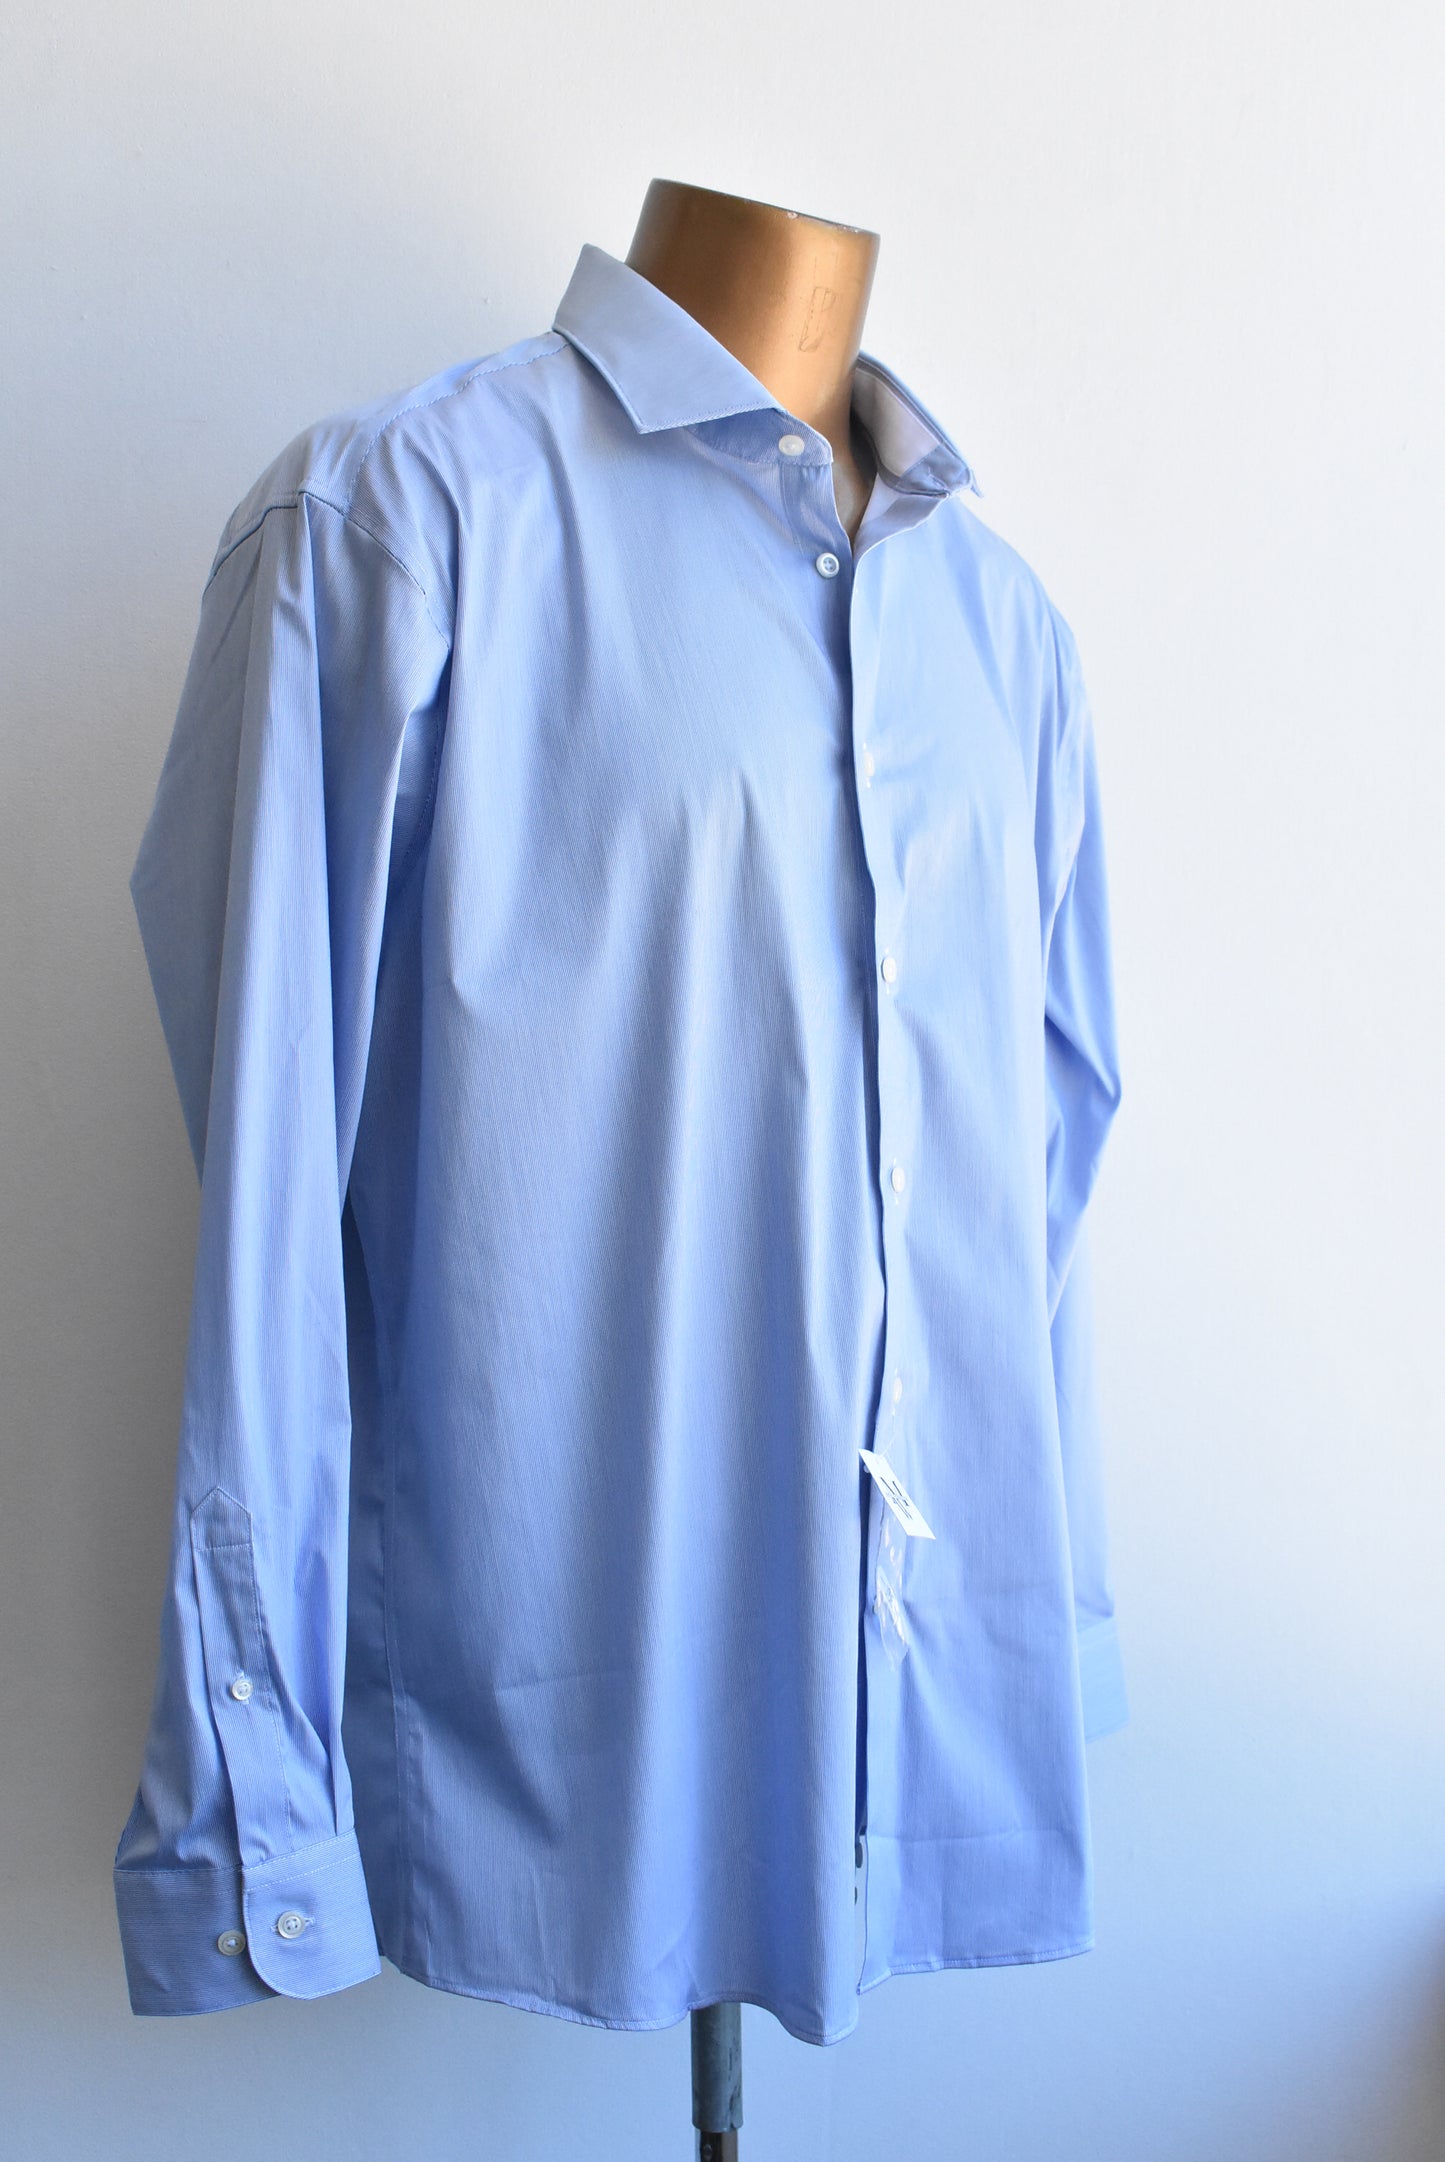 Just One Earth blue pinstriped shirt, size 34/35 Mens